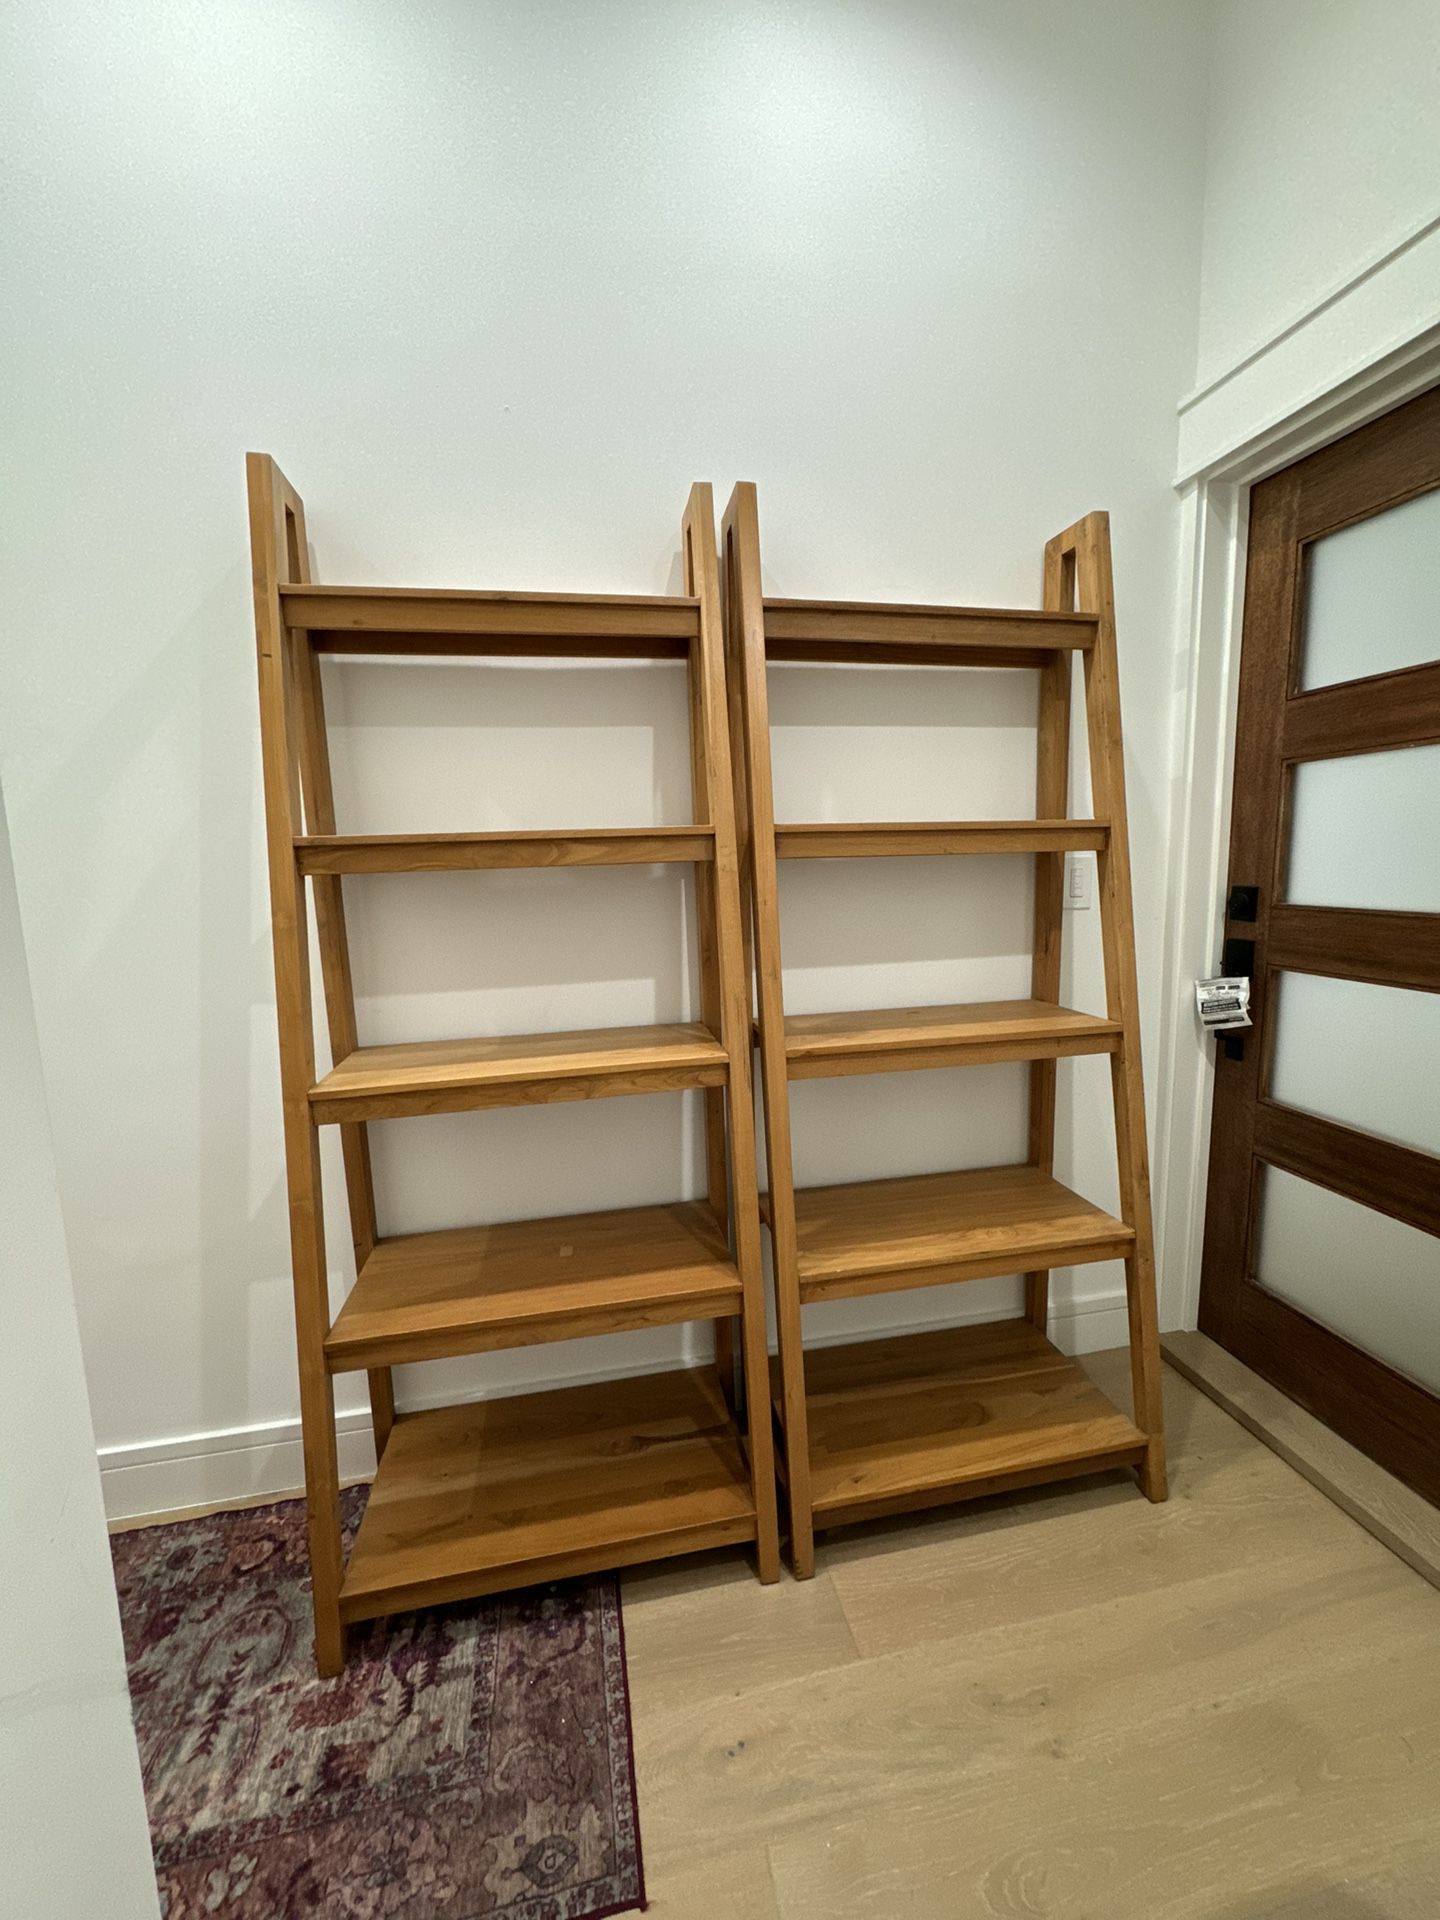 Bookshelves From Crate And Barrel